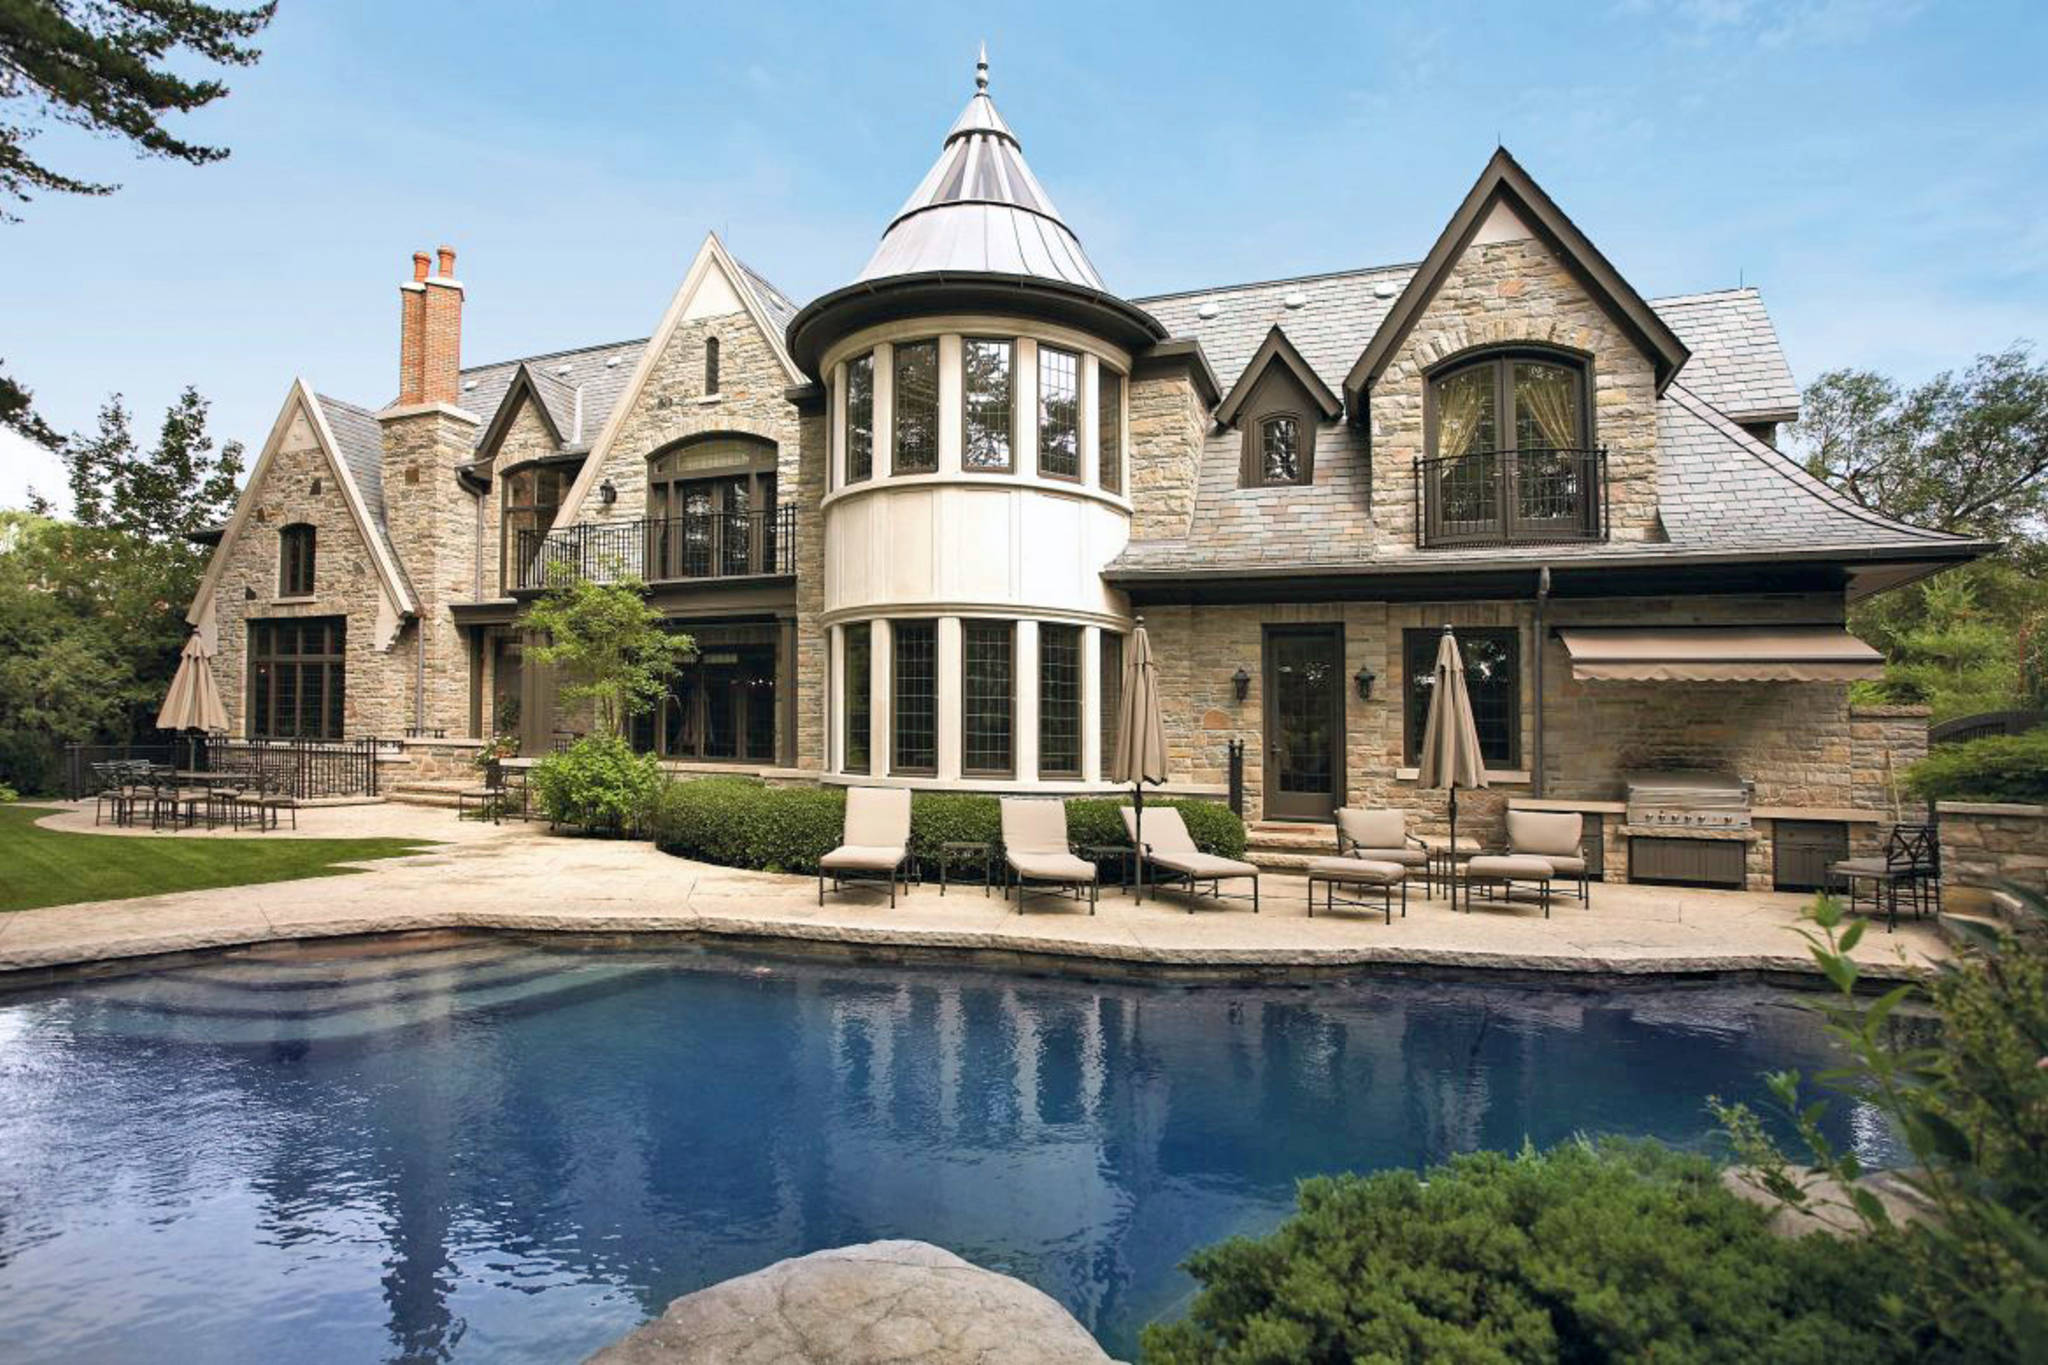 Sold! Unbelievable Toronto mansion goes for $11.3 million